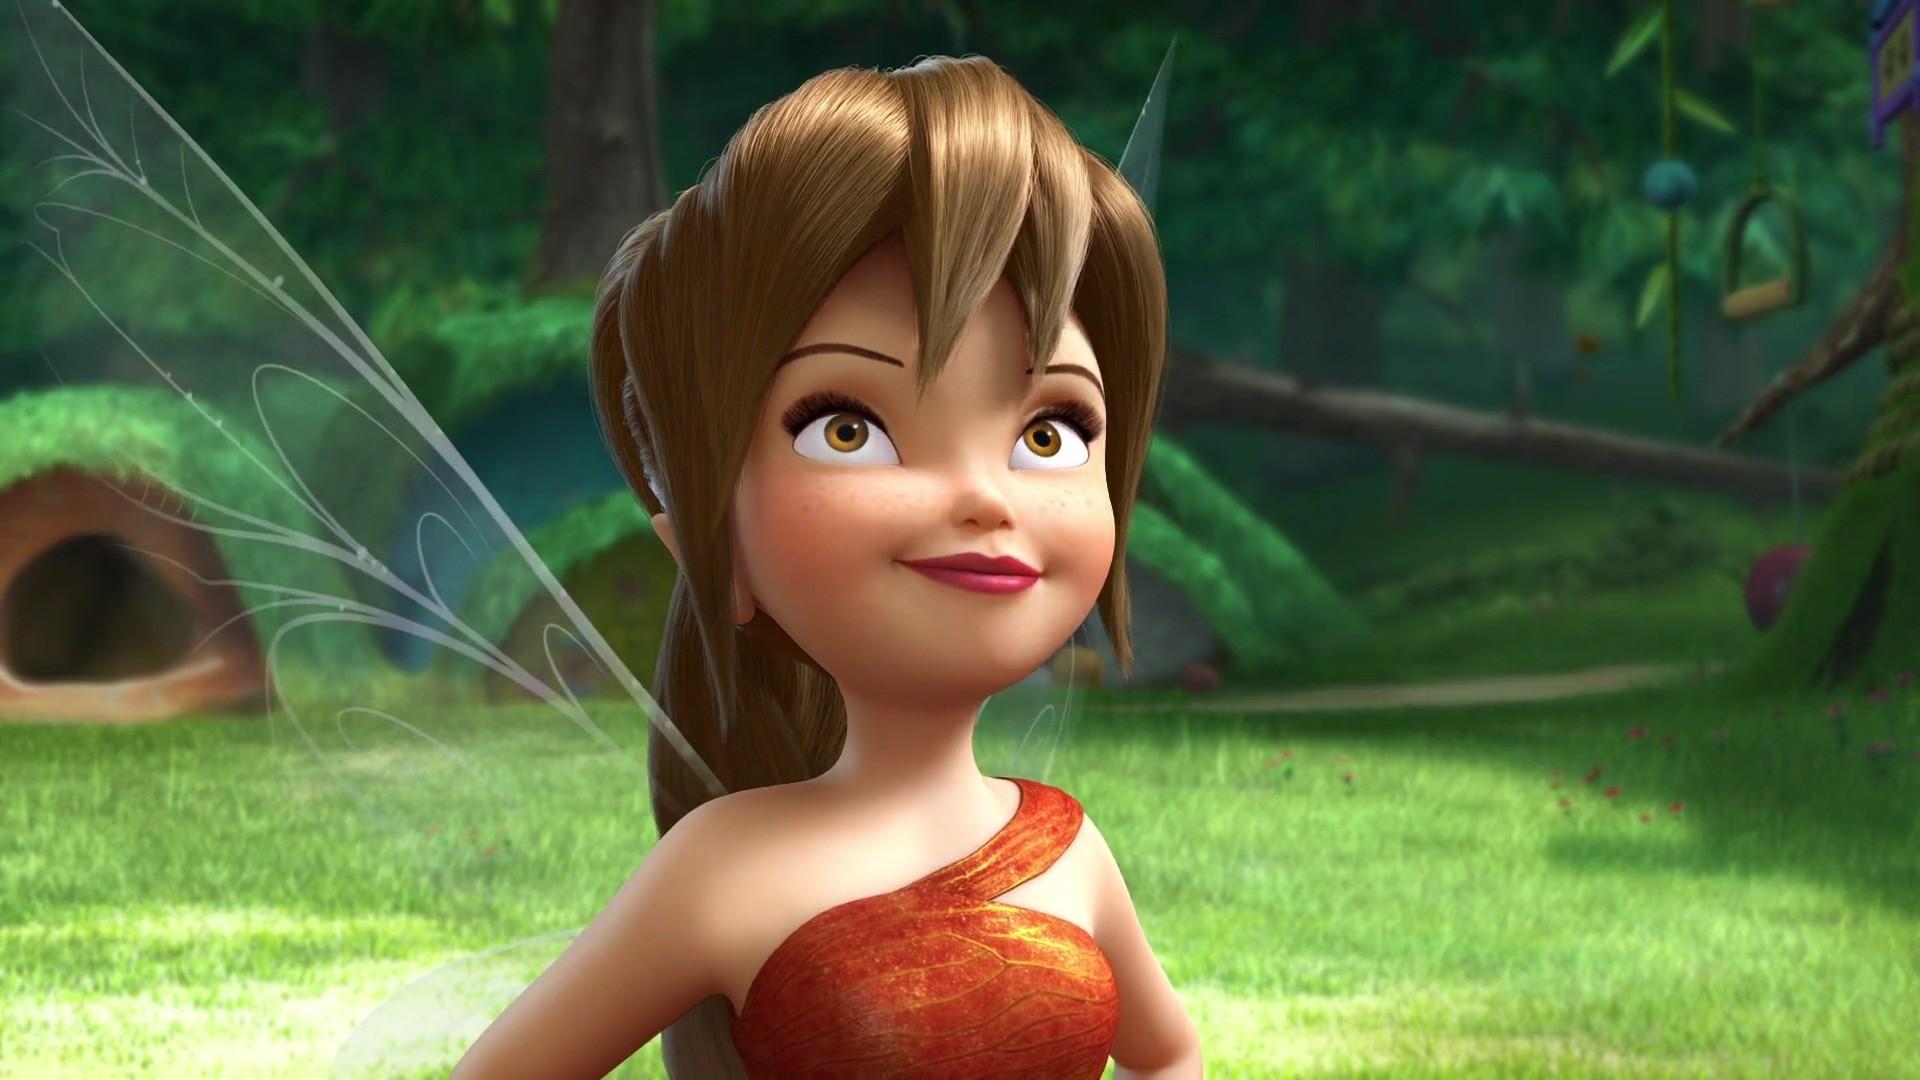 HD wallpaper, Tinkerbell, Movies, Animated Movies